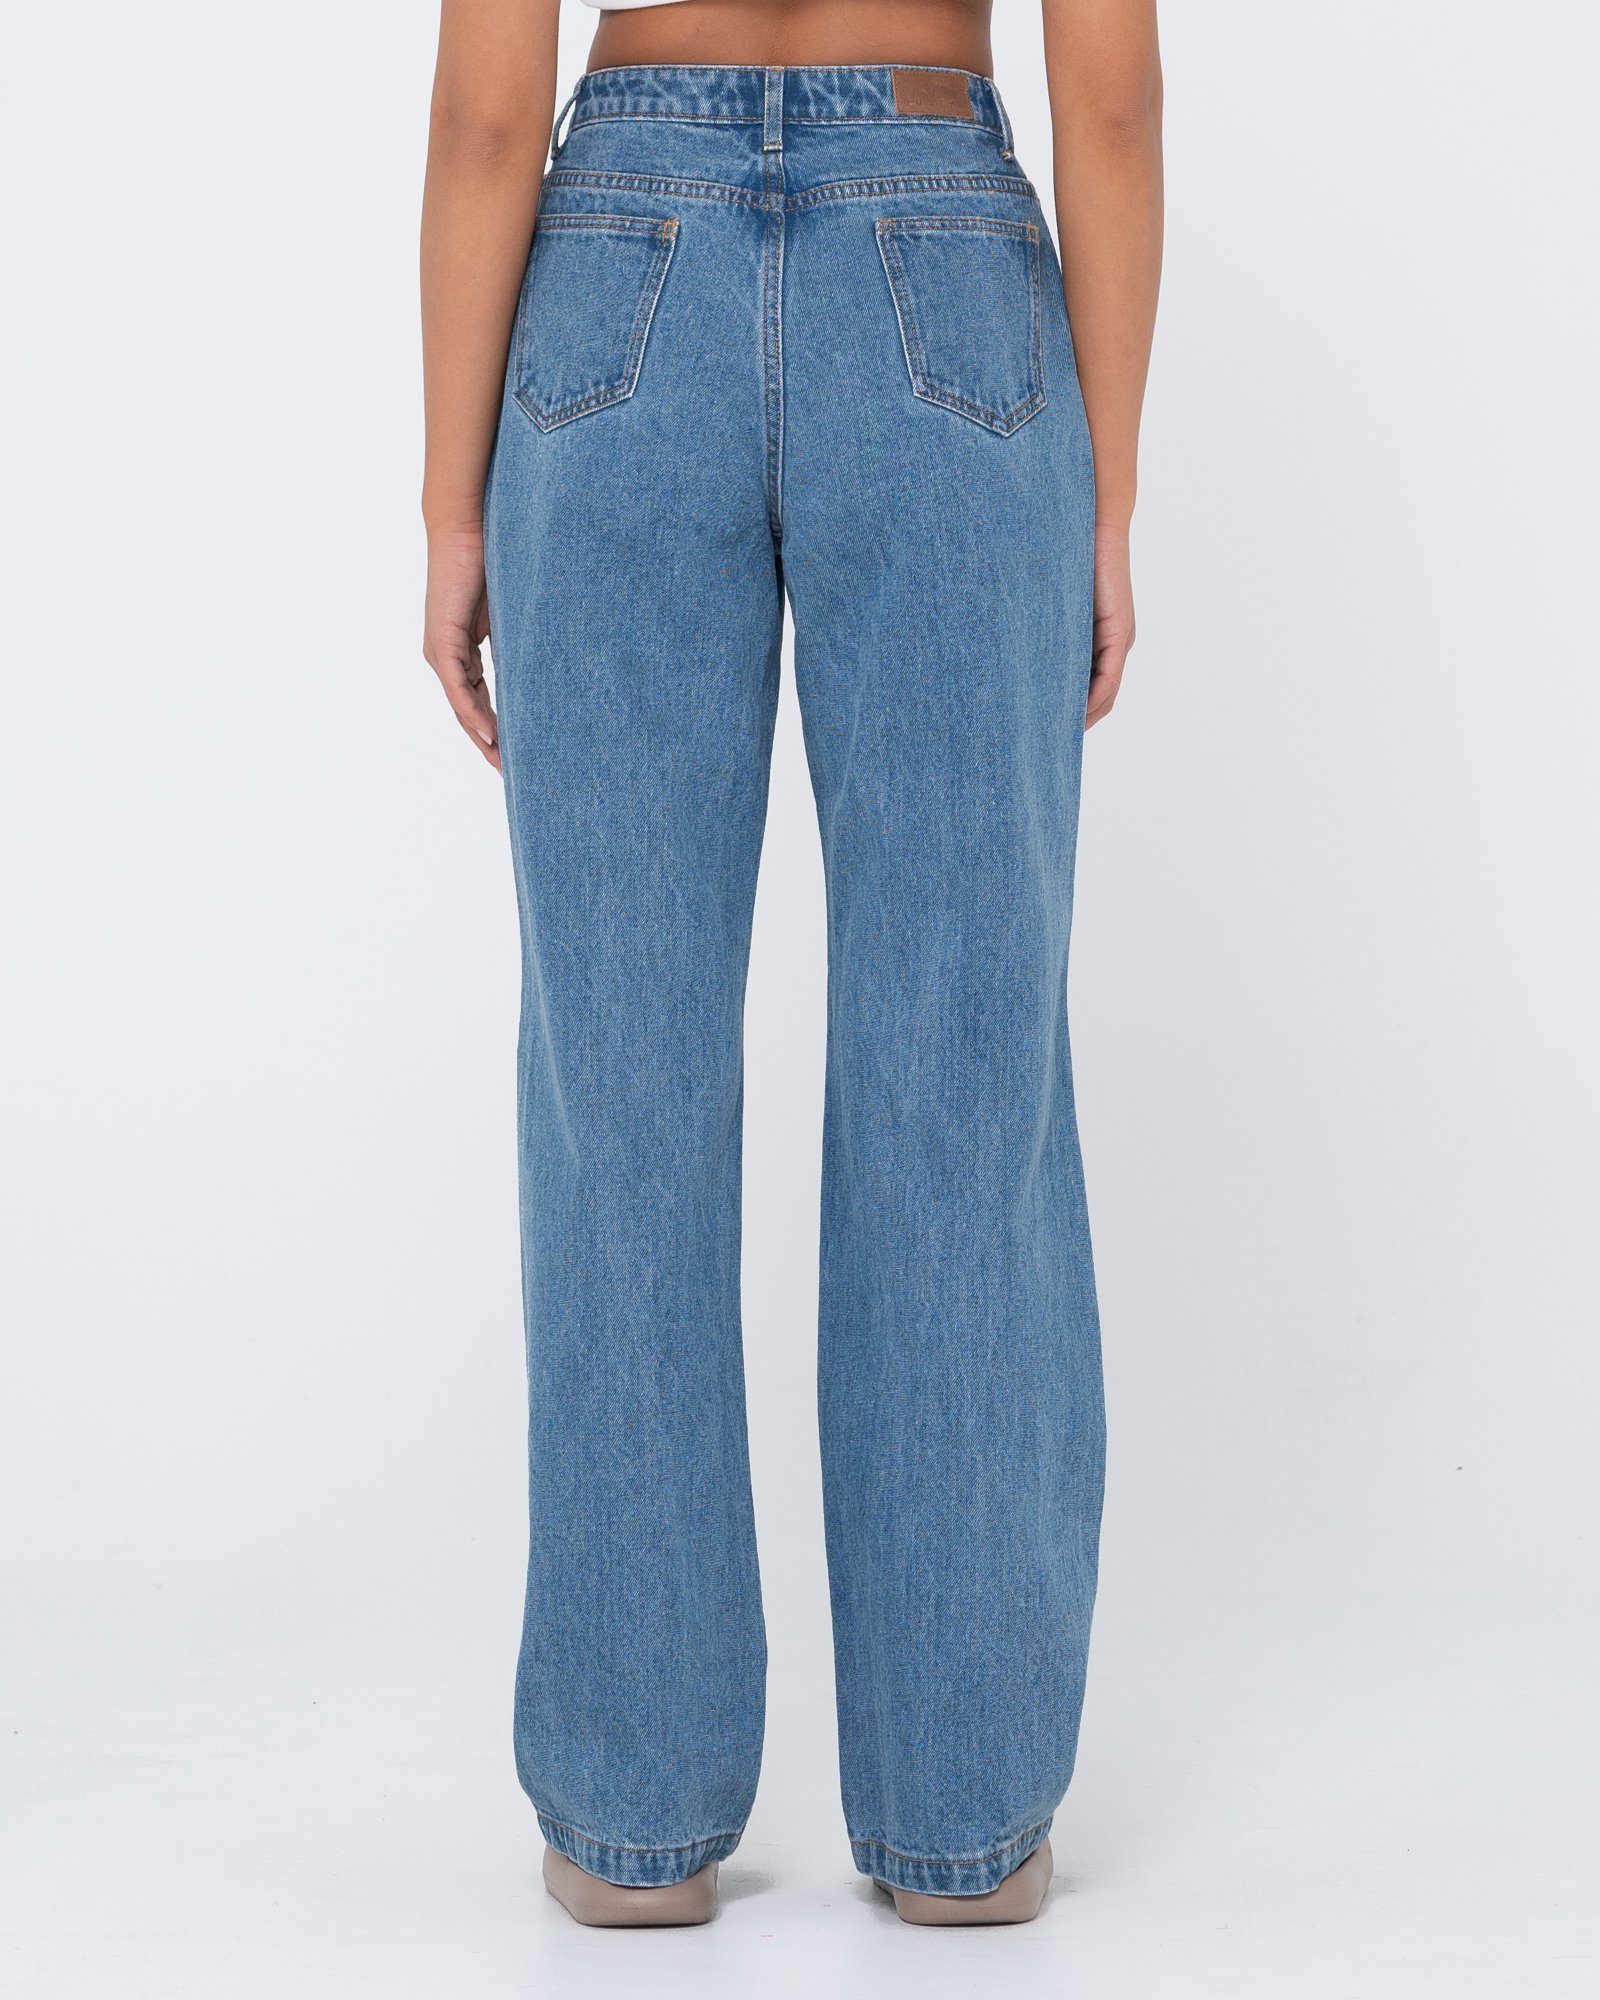 Jeans - Sea JEAN Rusty Weite HIGH BAGGY Blue